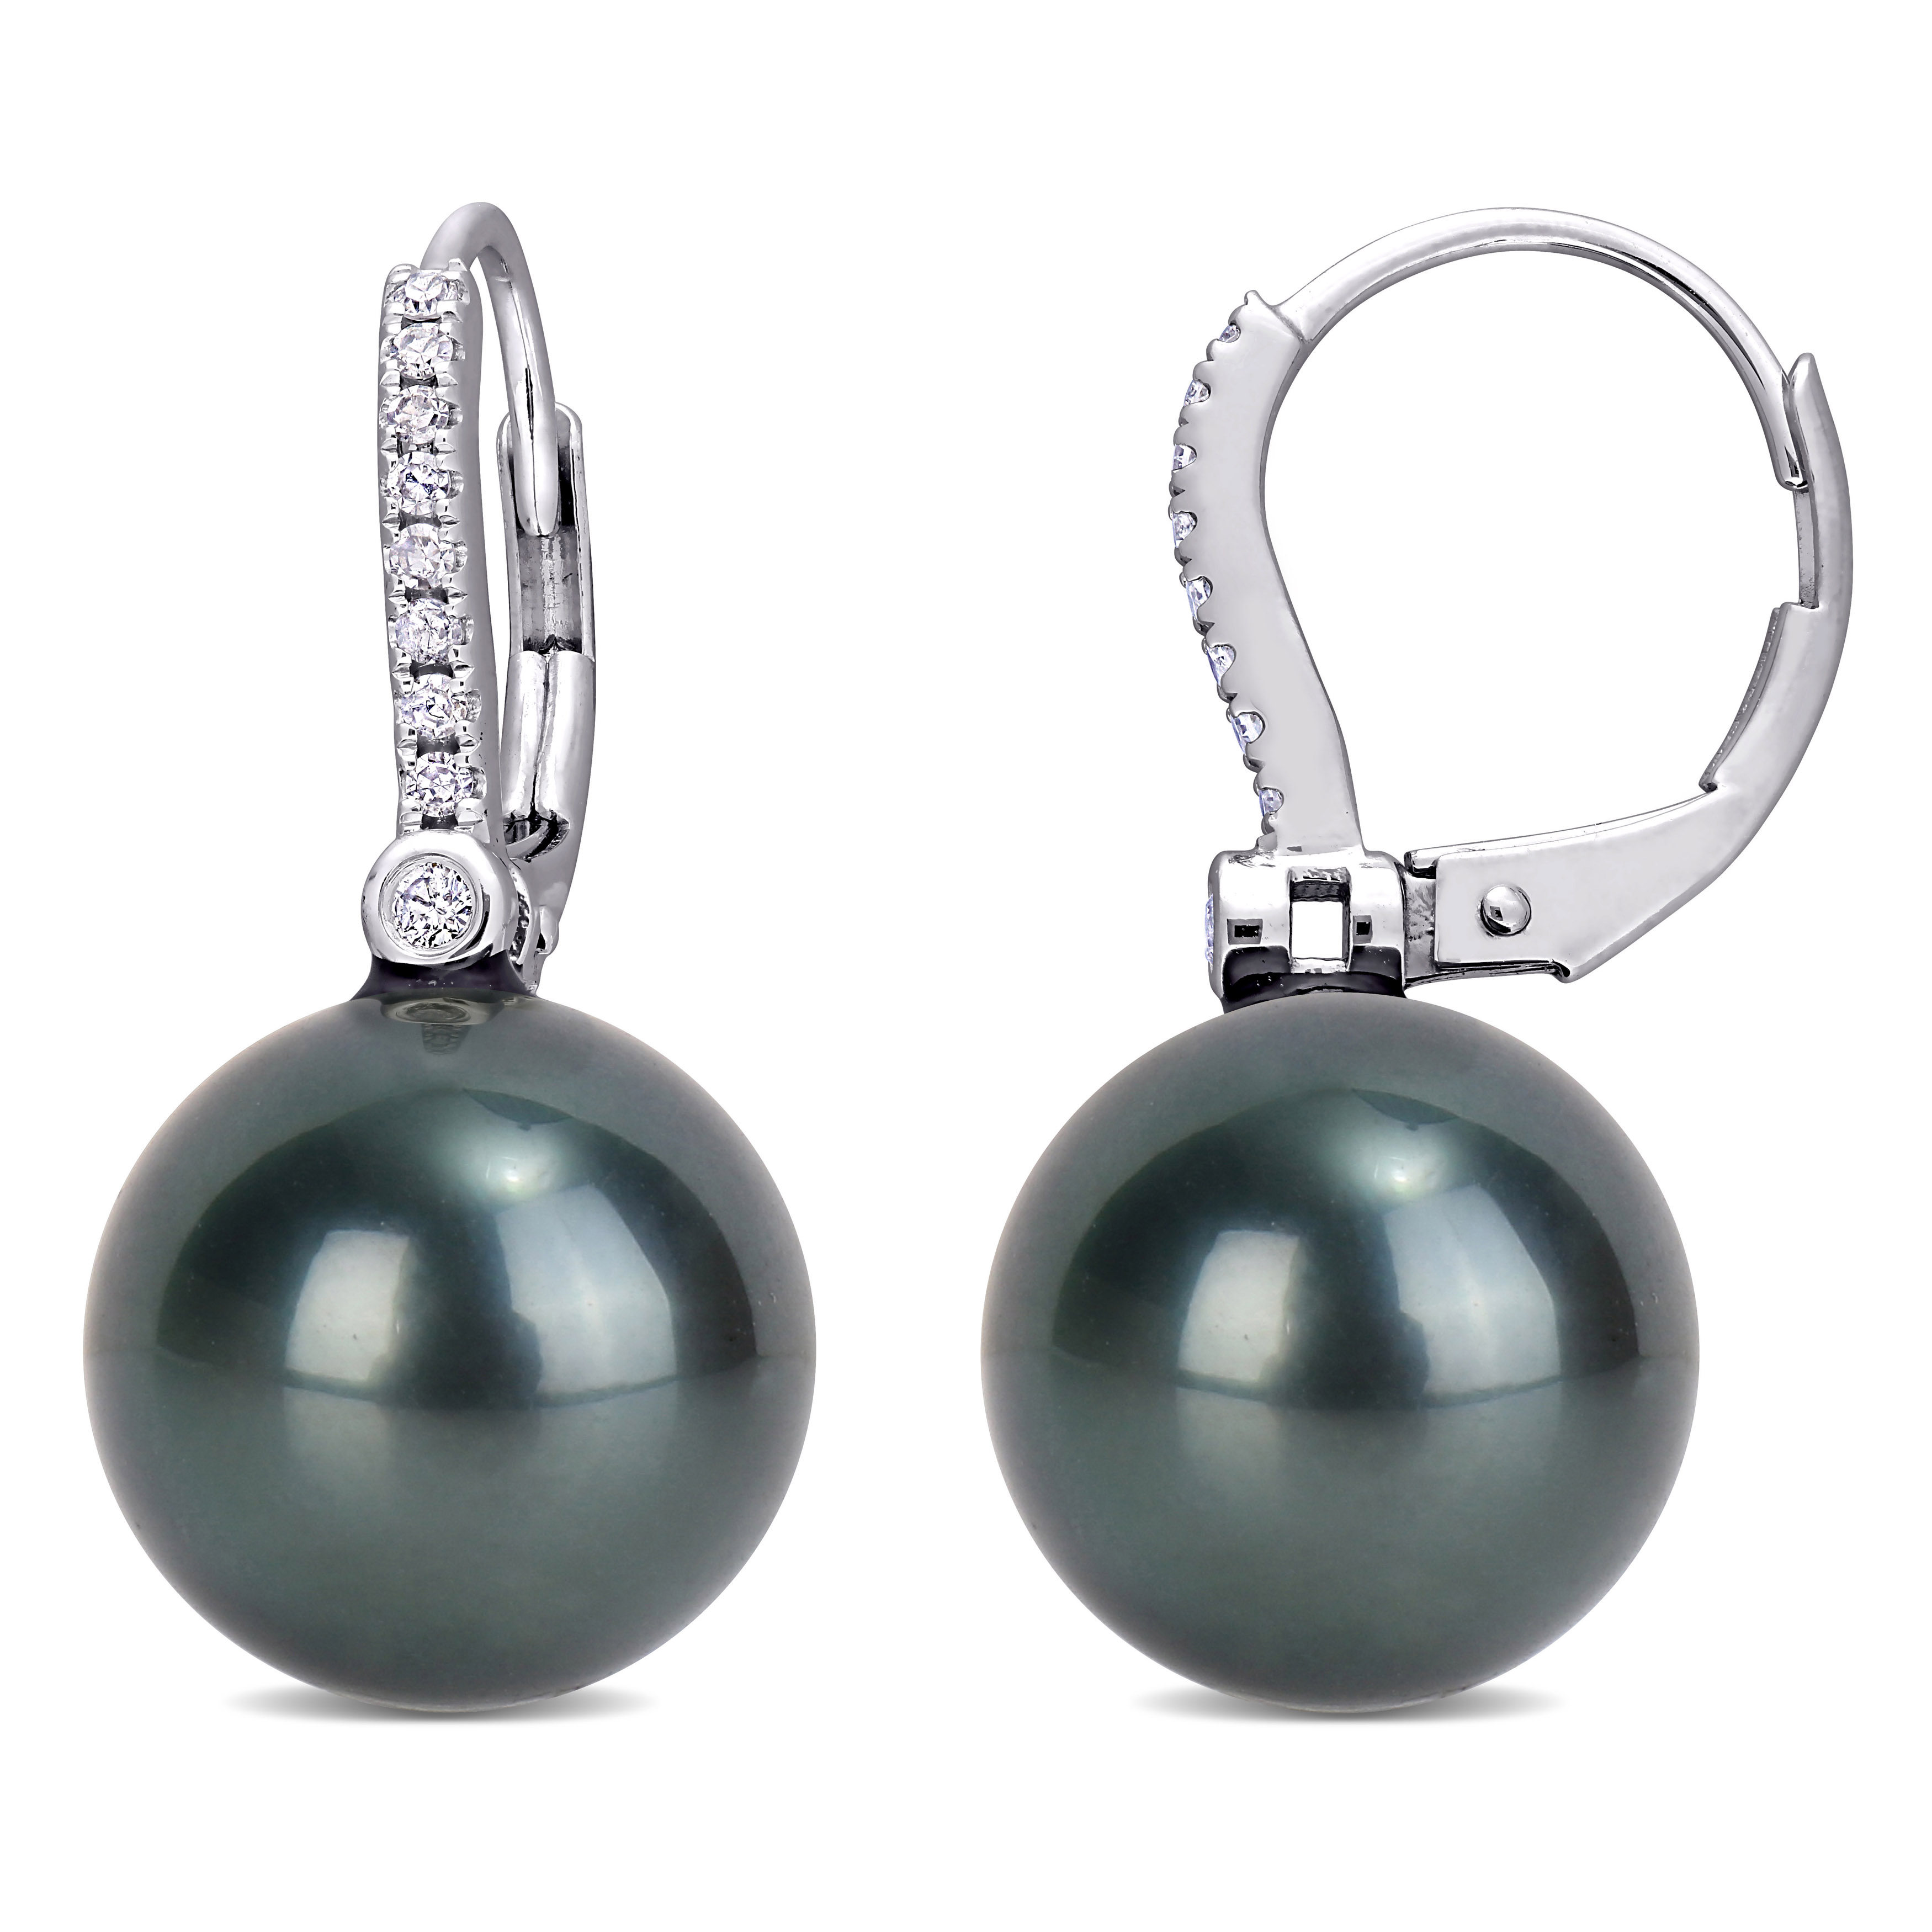 11 - 12 MM Black Tahitian Cultured Pearl and 1/8 CT TW Diamond Leverback Earrings in 10k White Gold